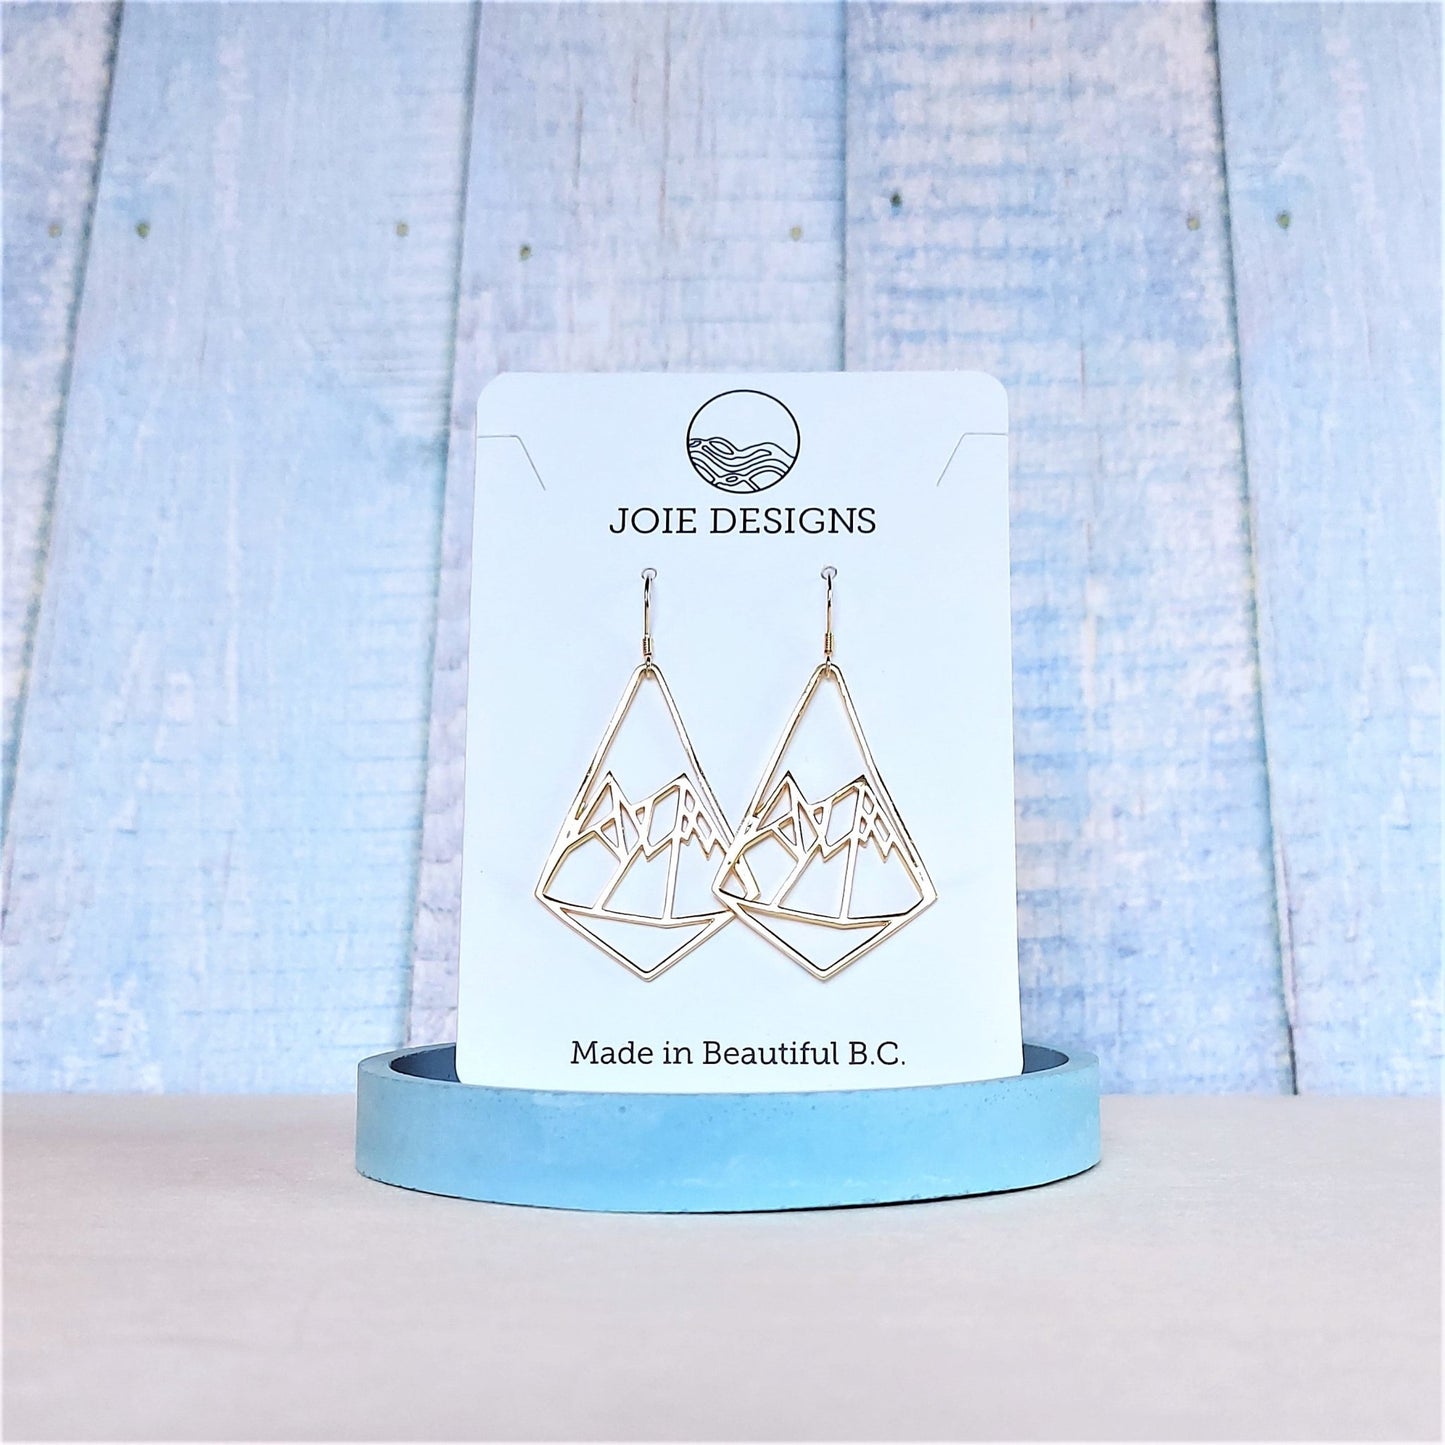 18k yellow gold geometric dangle earrings with mountain design on french ear wires showcased on a jewellery card